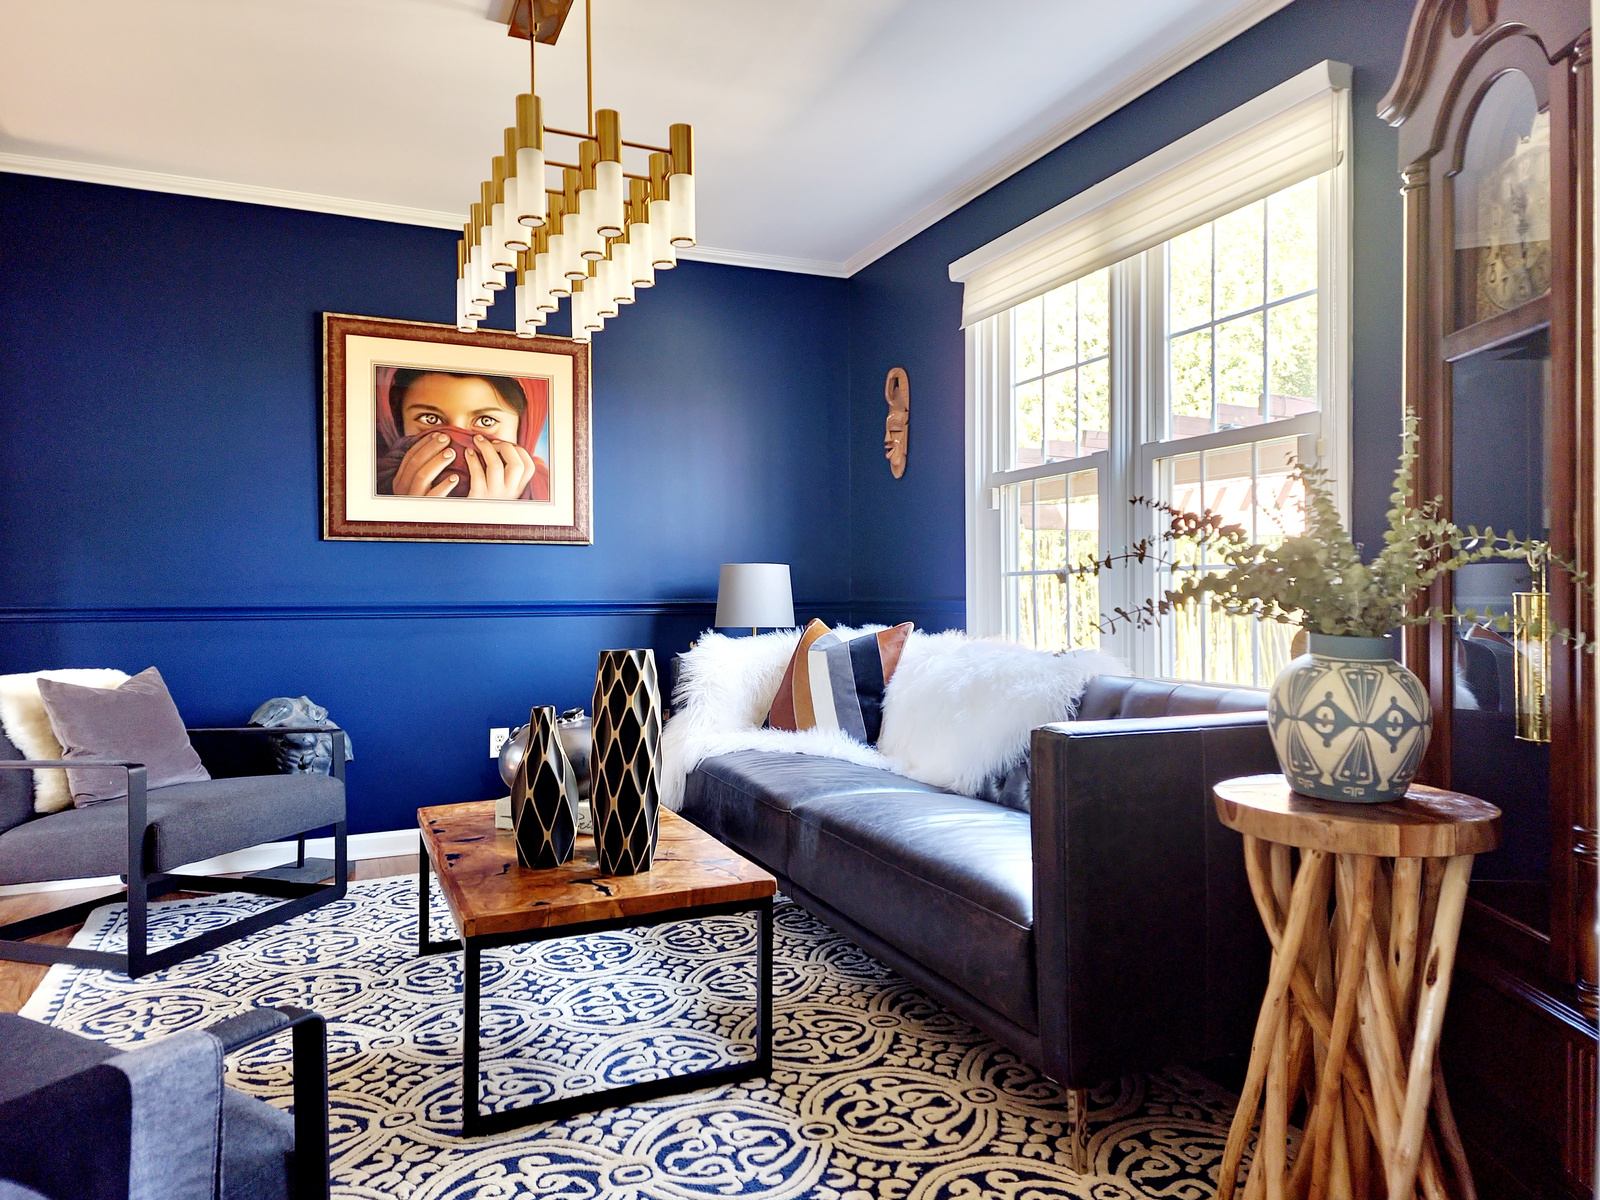 a living room with blue walls and a black and white patterned rug design by bespoke by ali fasi main line philadelpha